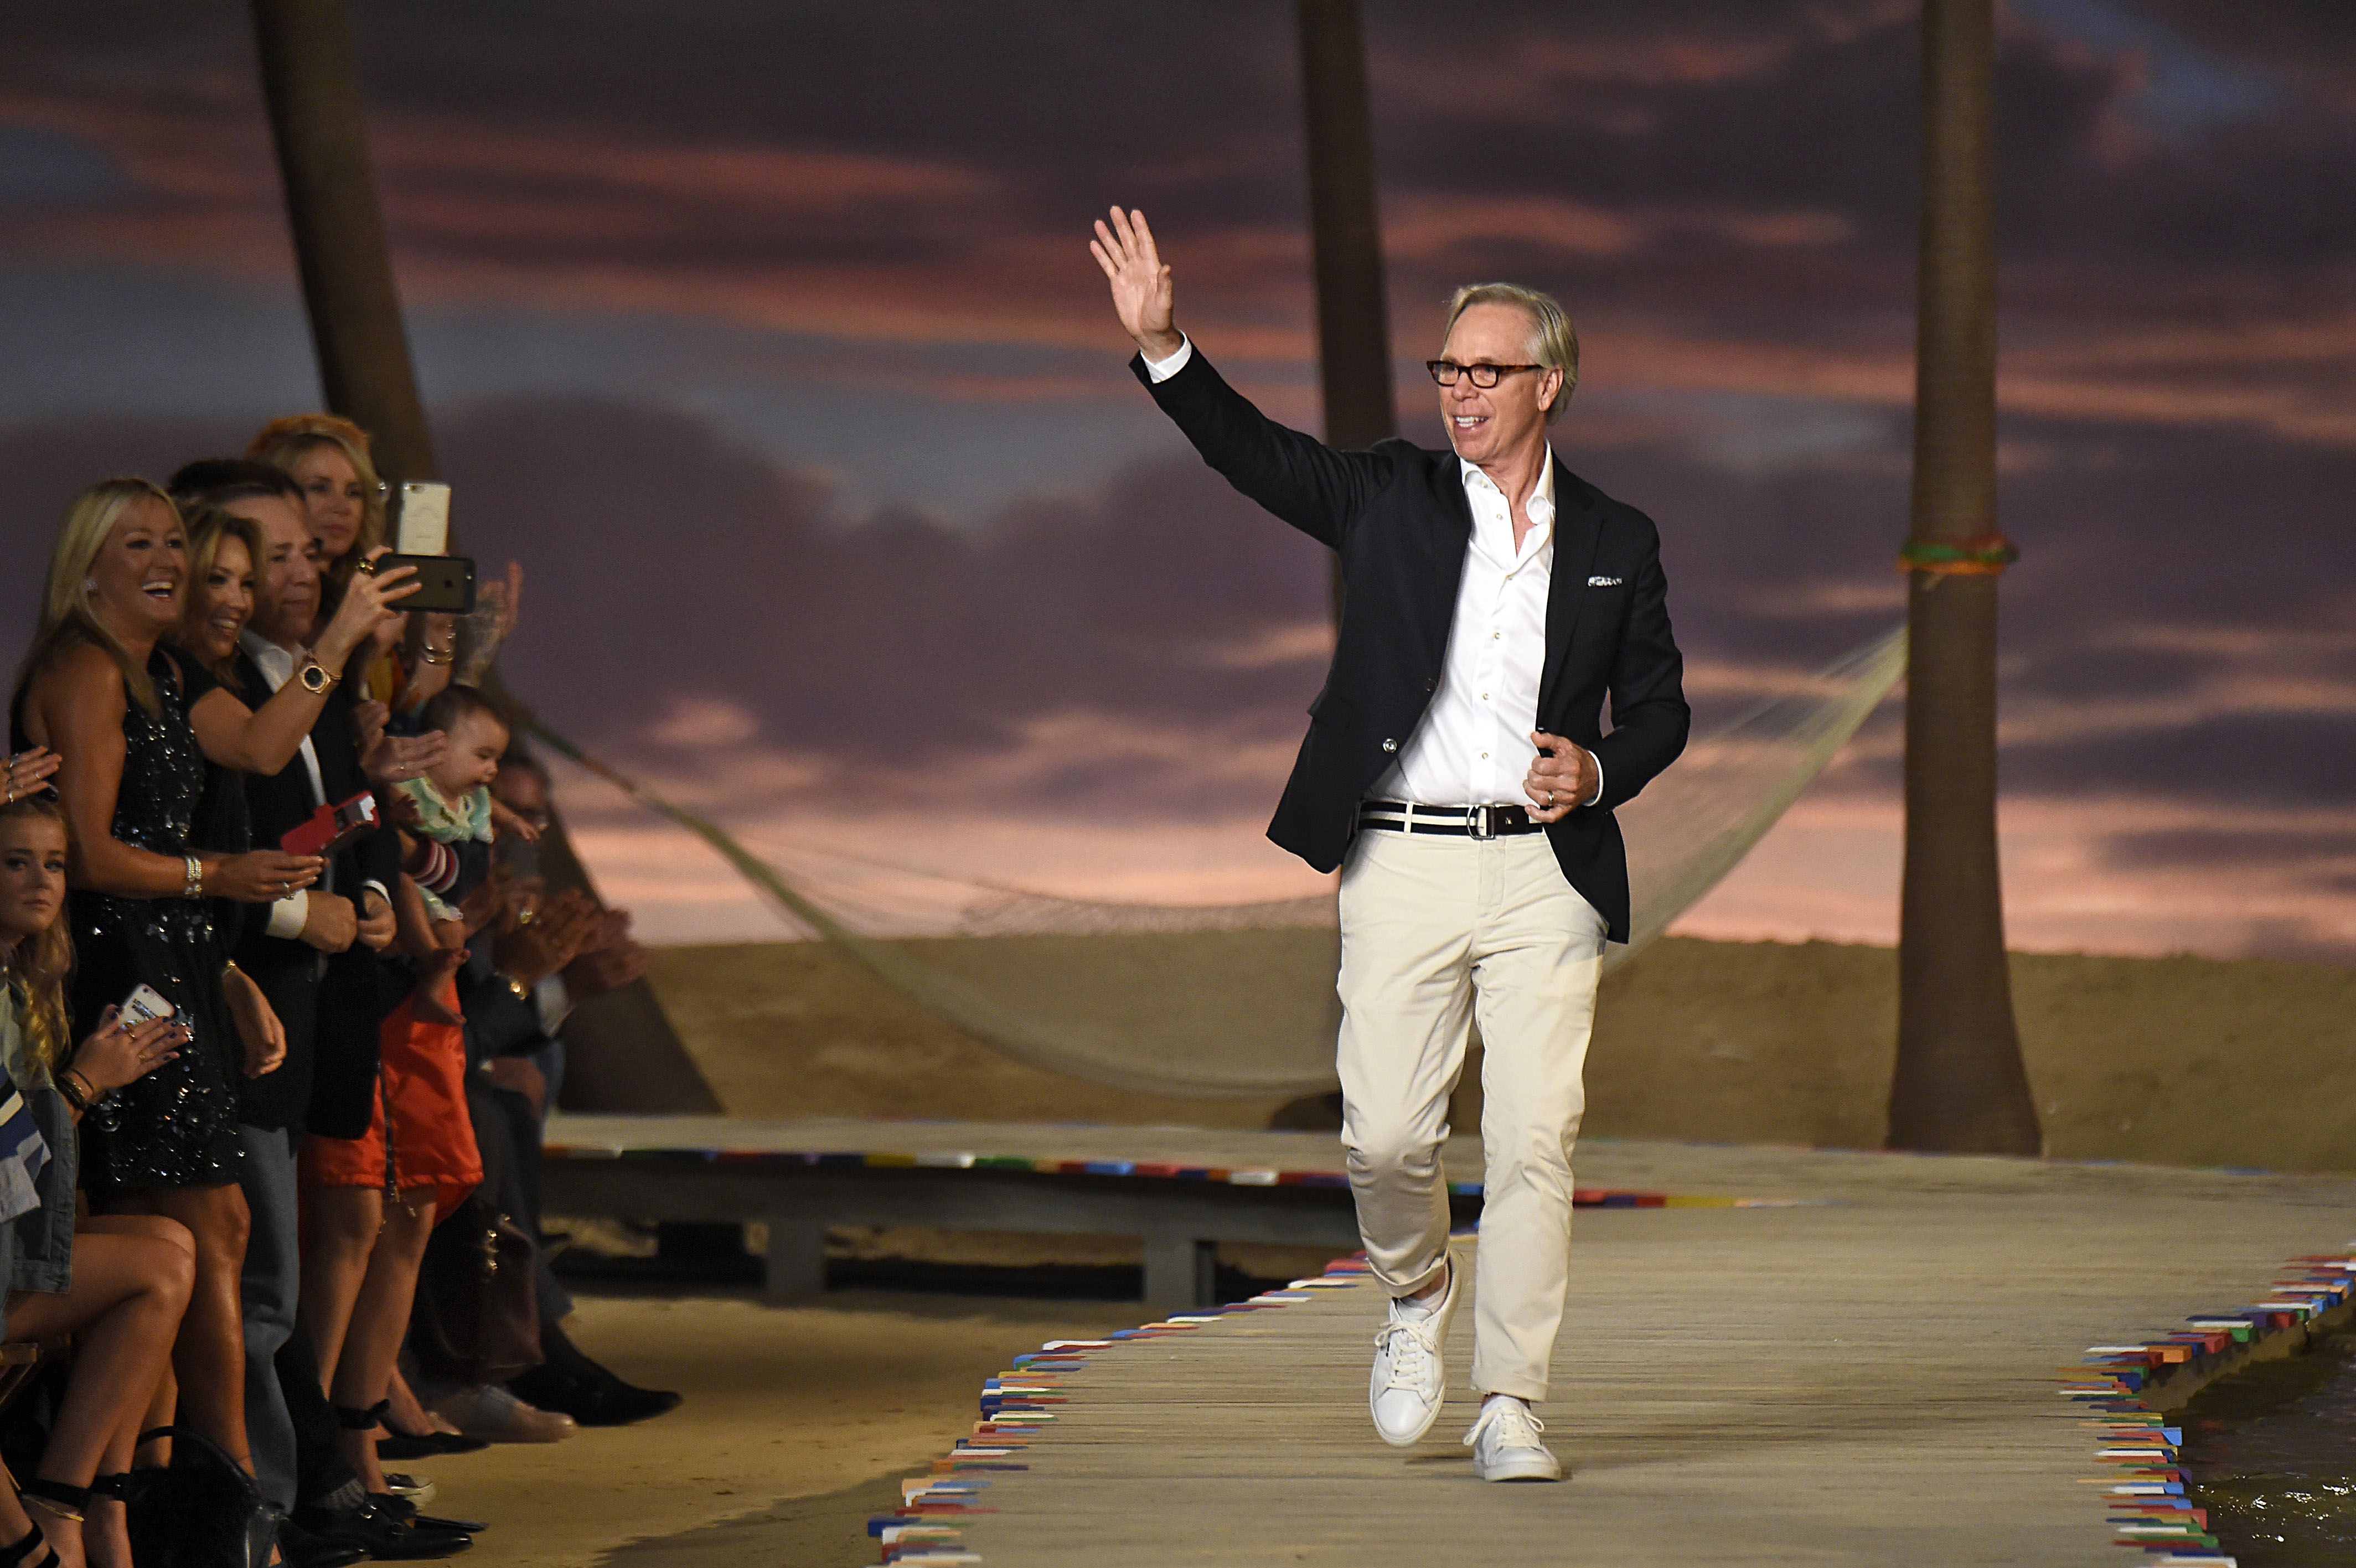 genetisch iets eenheid Tommy Hilfiger to be honoured at this year's Fashion Awards